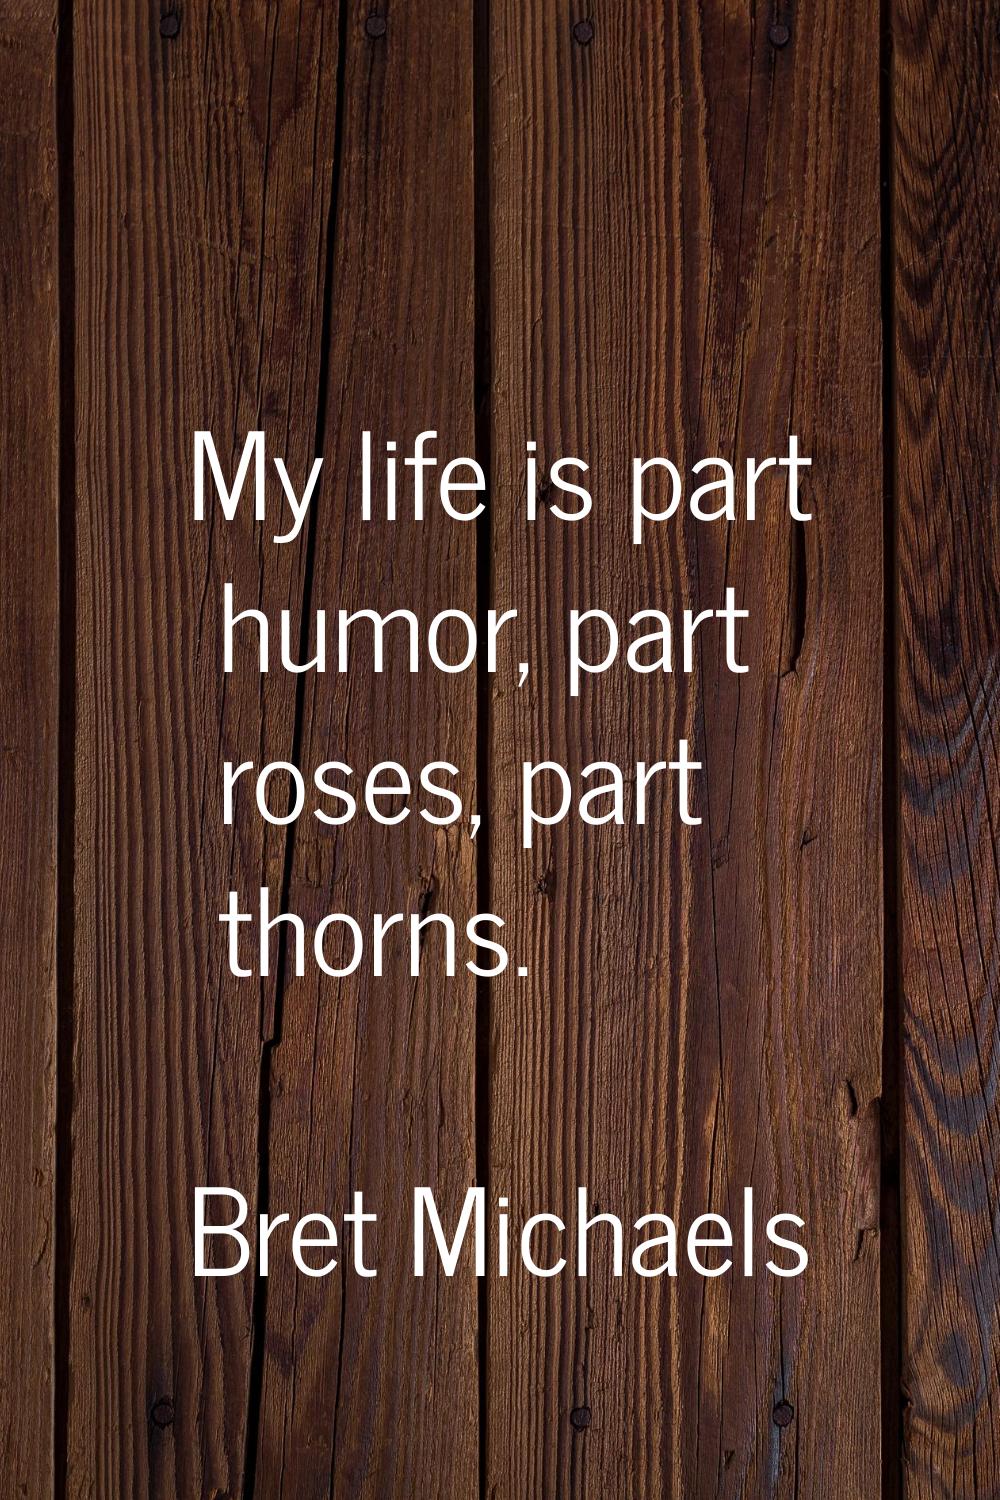 My life is part humor, part roses, part thorns.